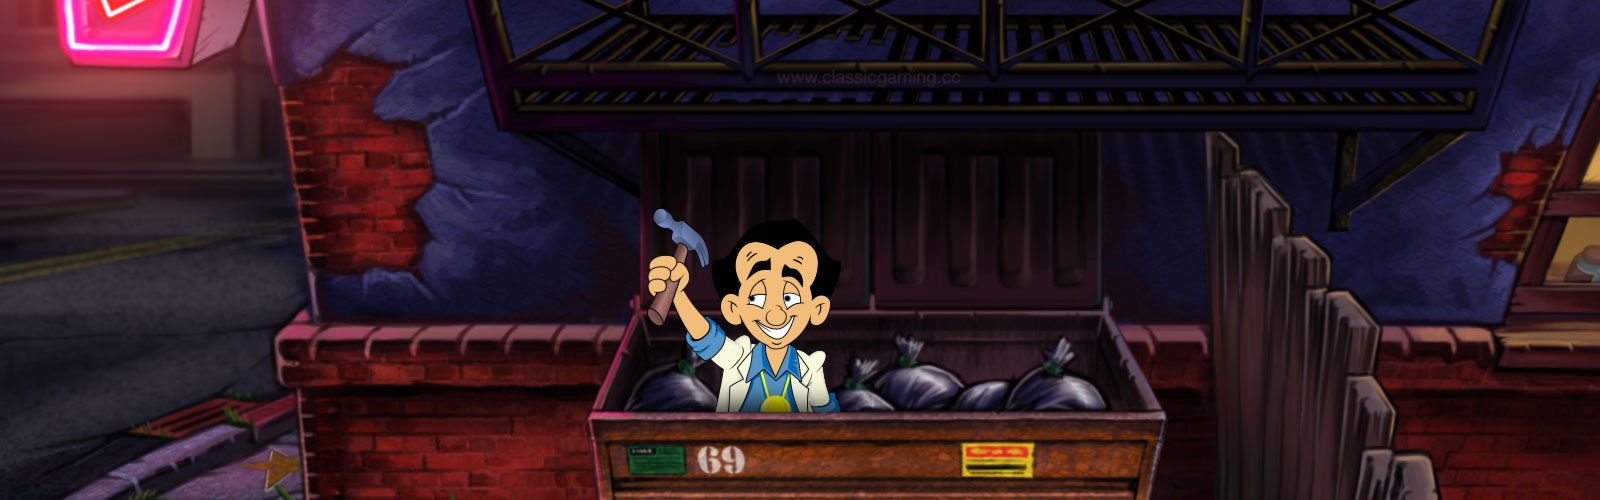 Items and Objects Found in Leisure Suit Larry in the Land of the Lounge Lizards